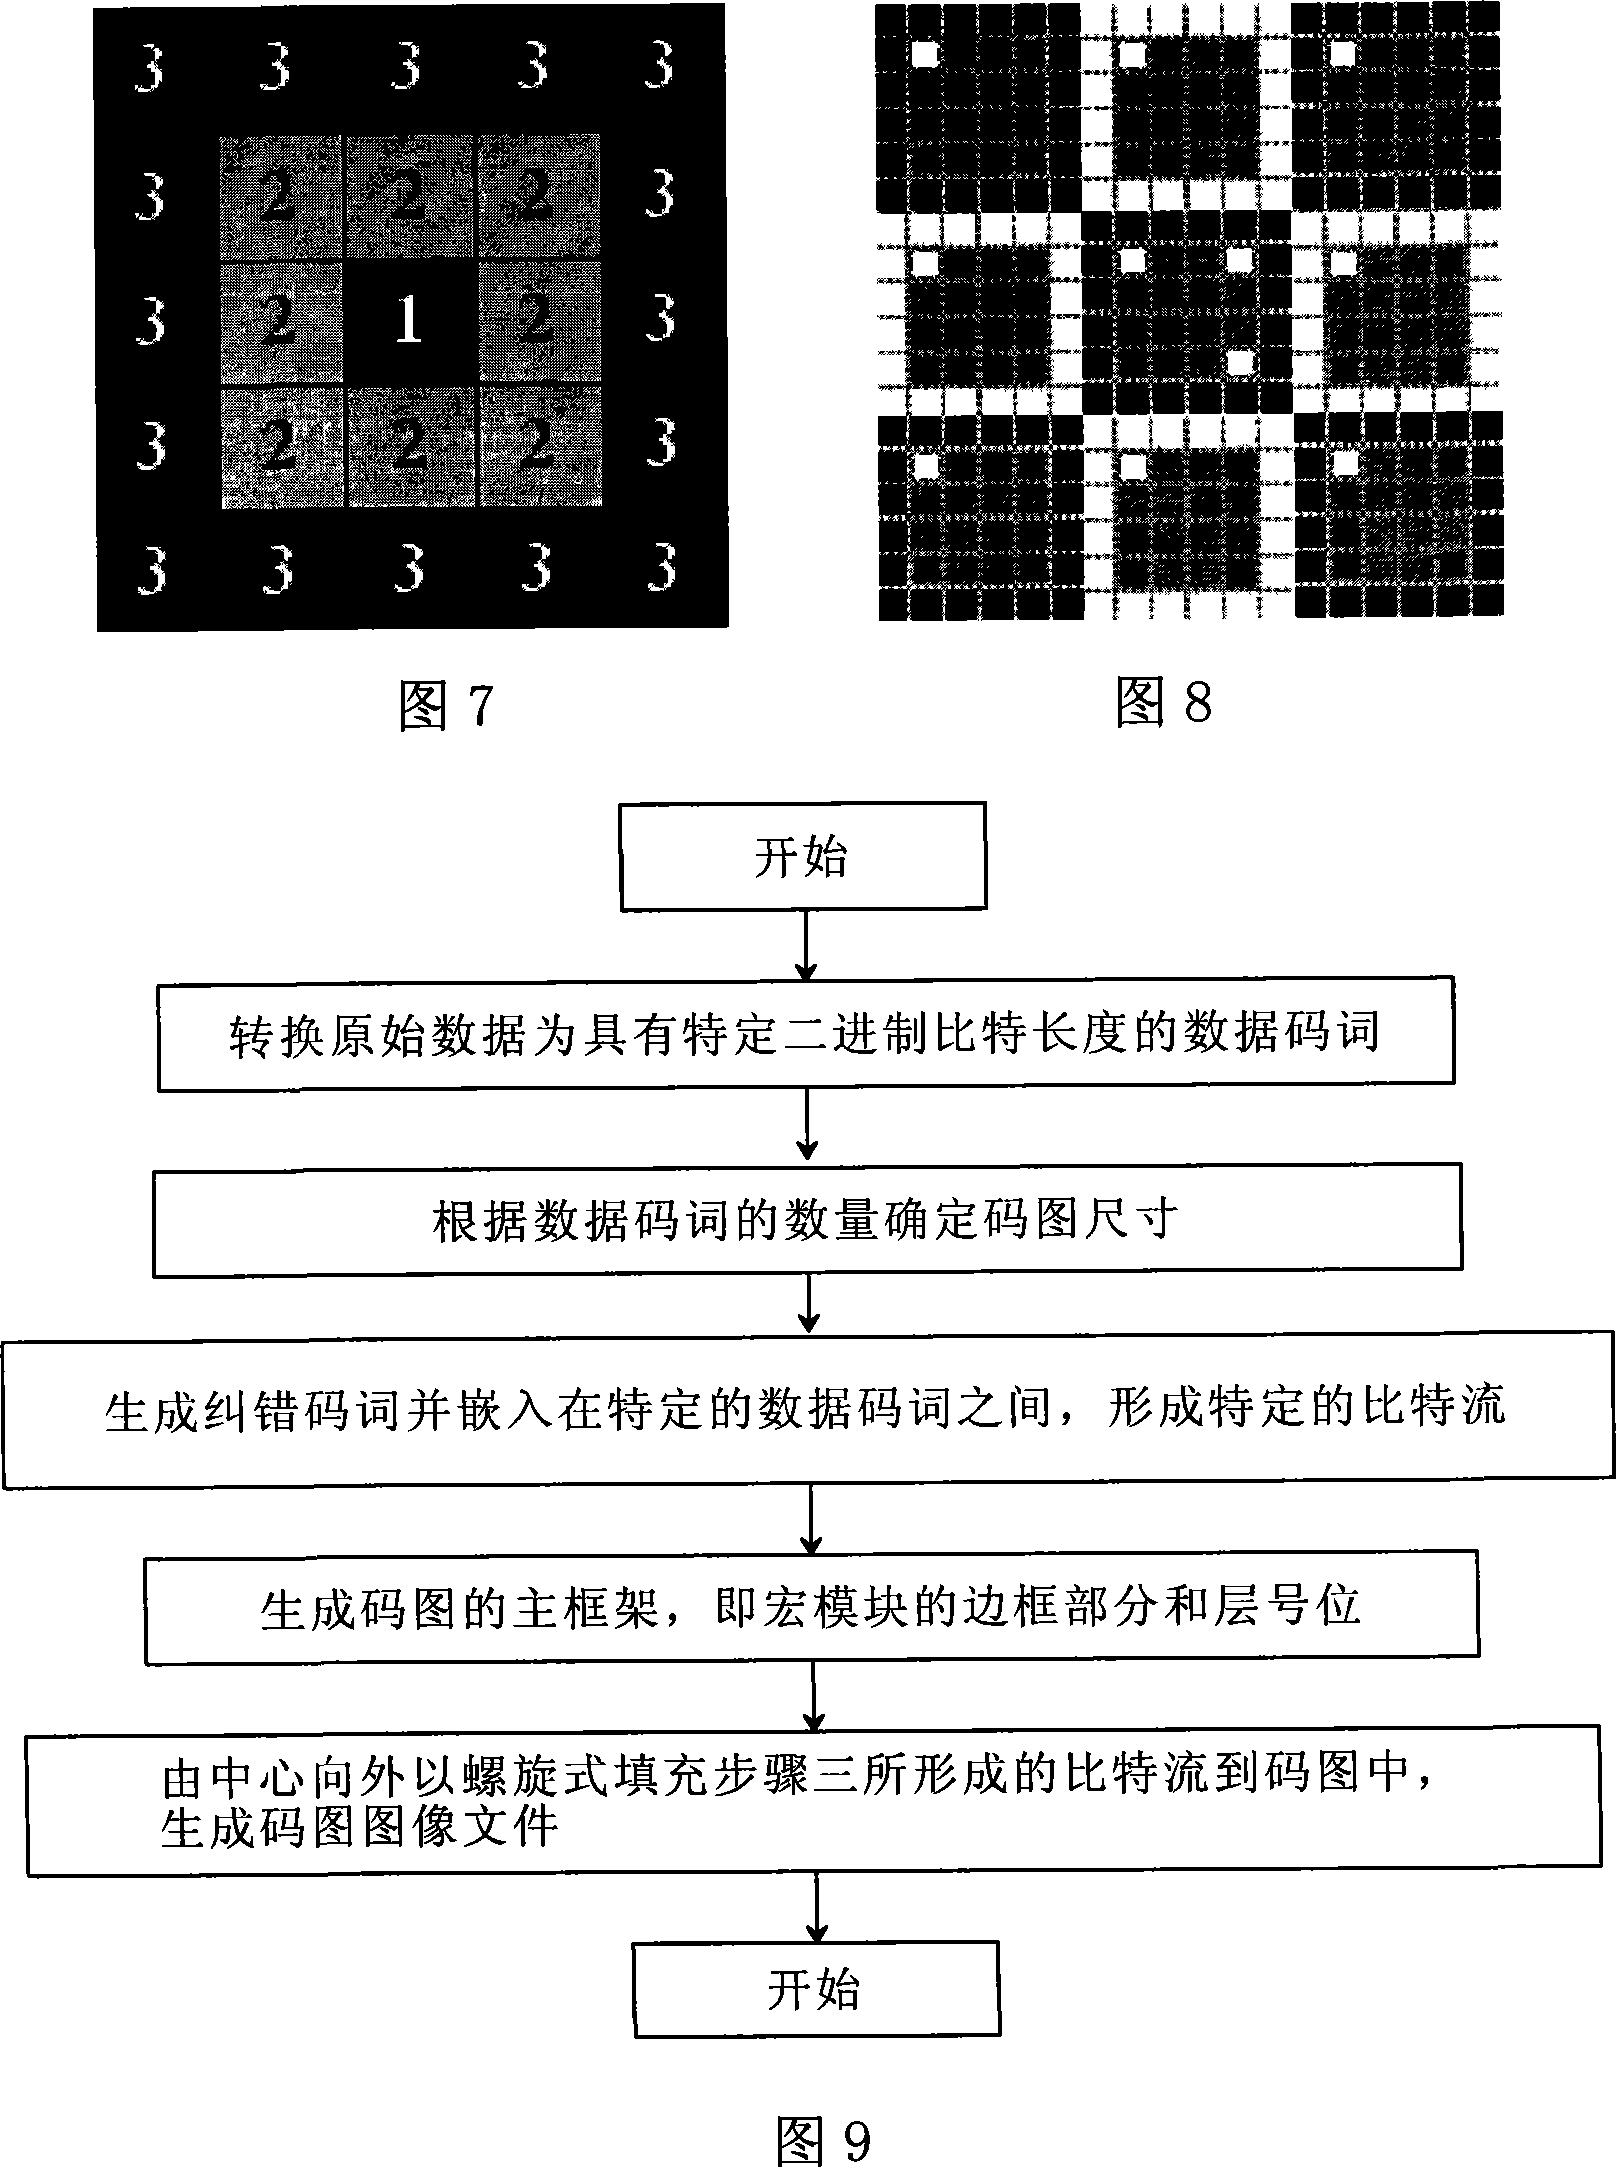 Two-dimension bar code and its coding and decoding method